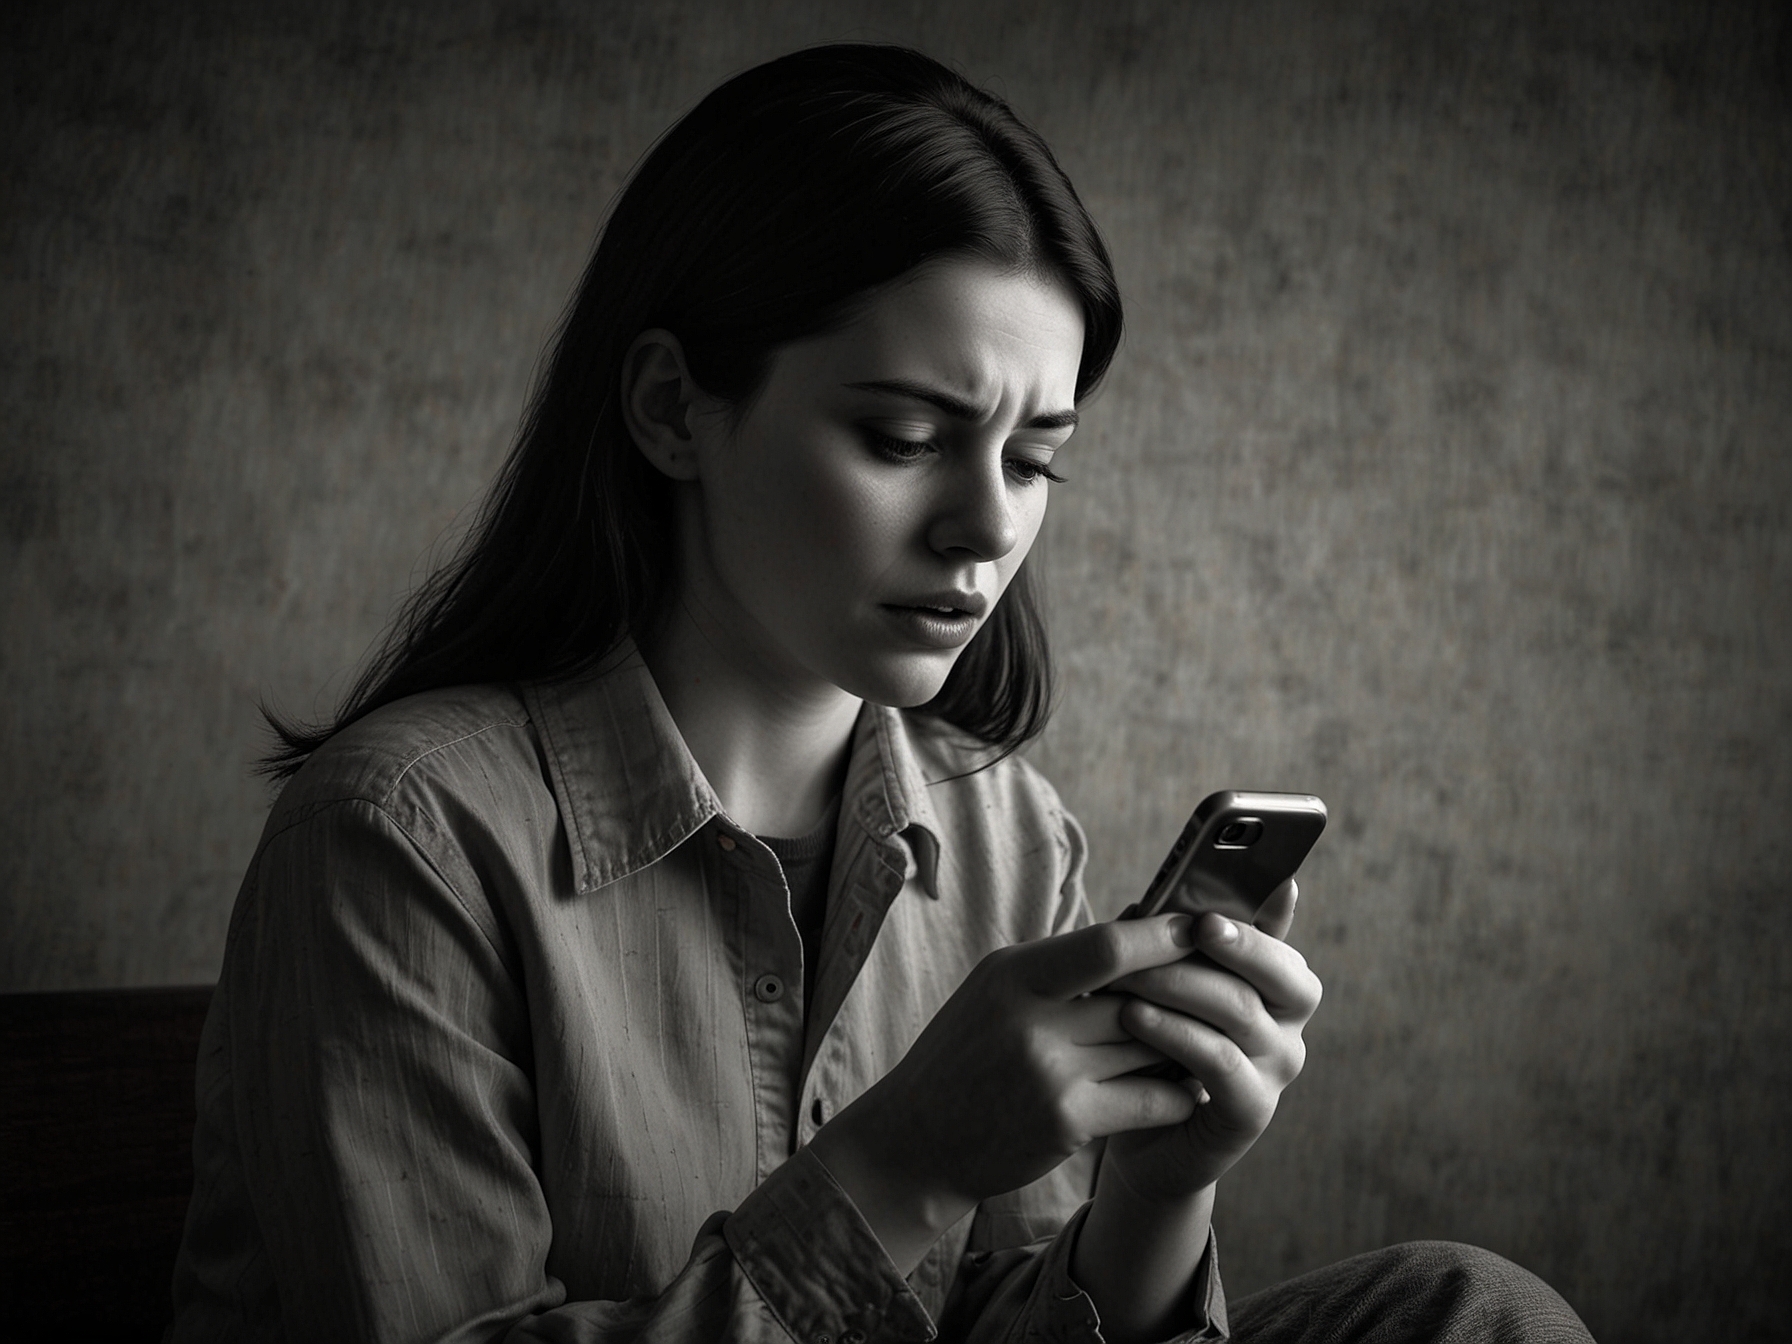 A woman reading a disheartening message on her phone with a look of shock and sadness, representing the moment she discovered her boyfriend's betrayal.